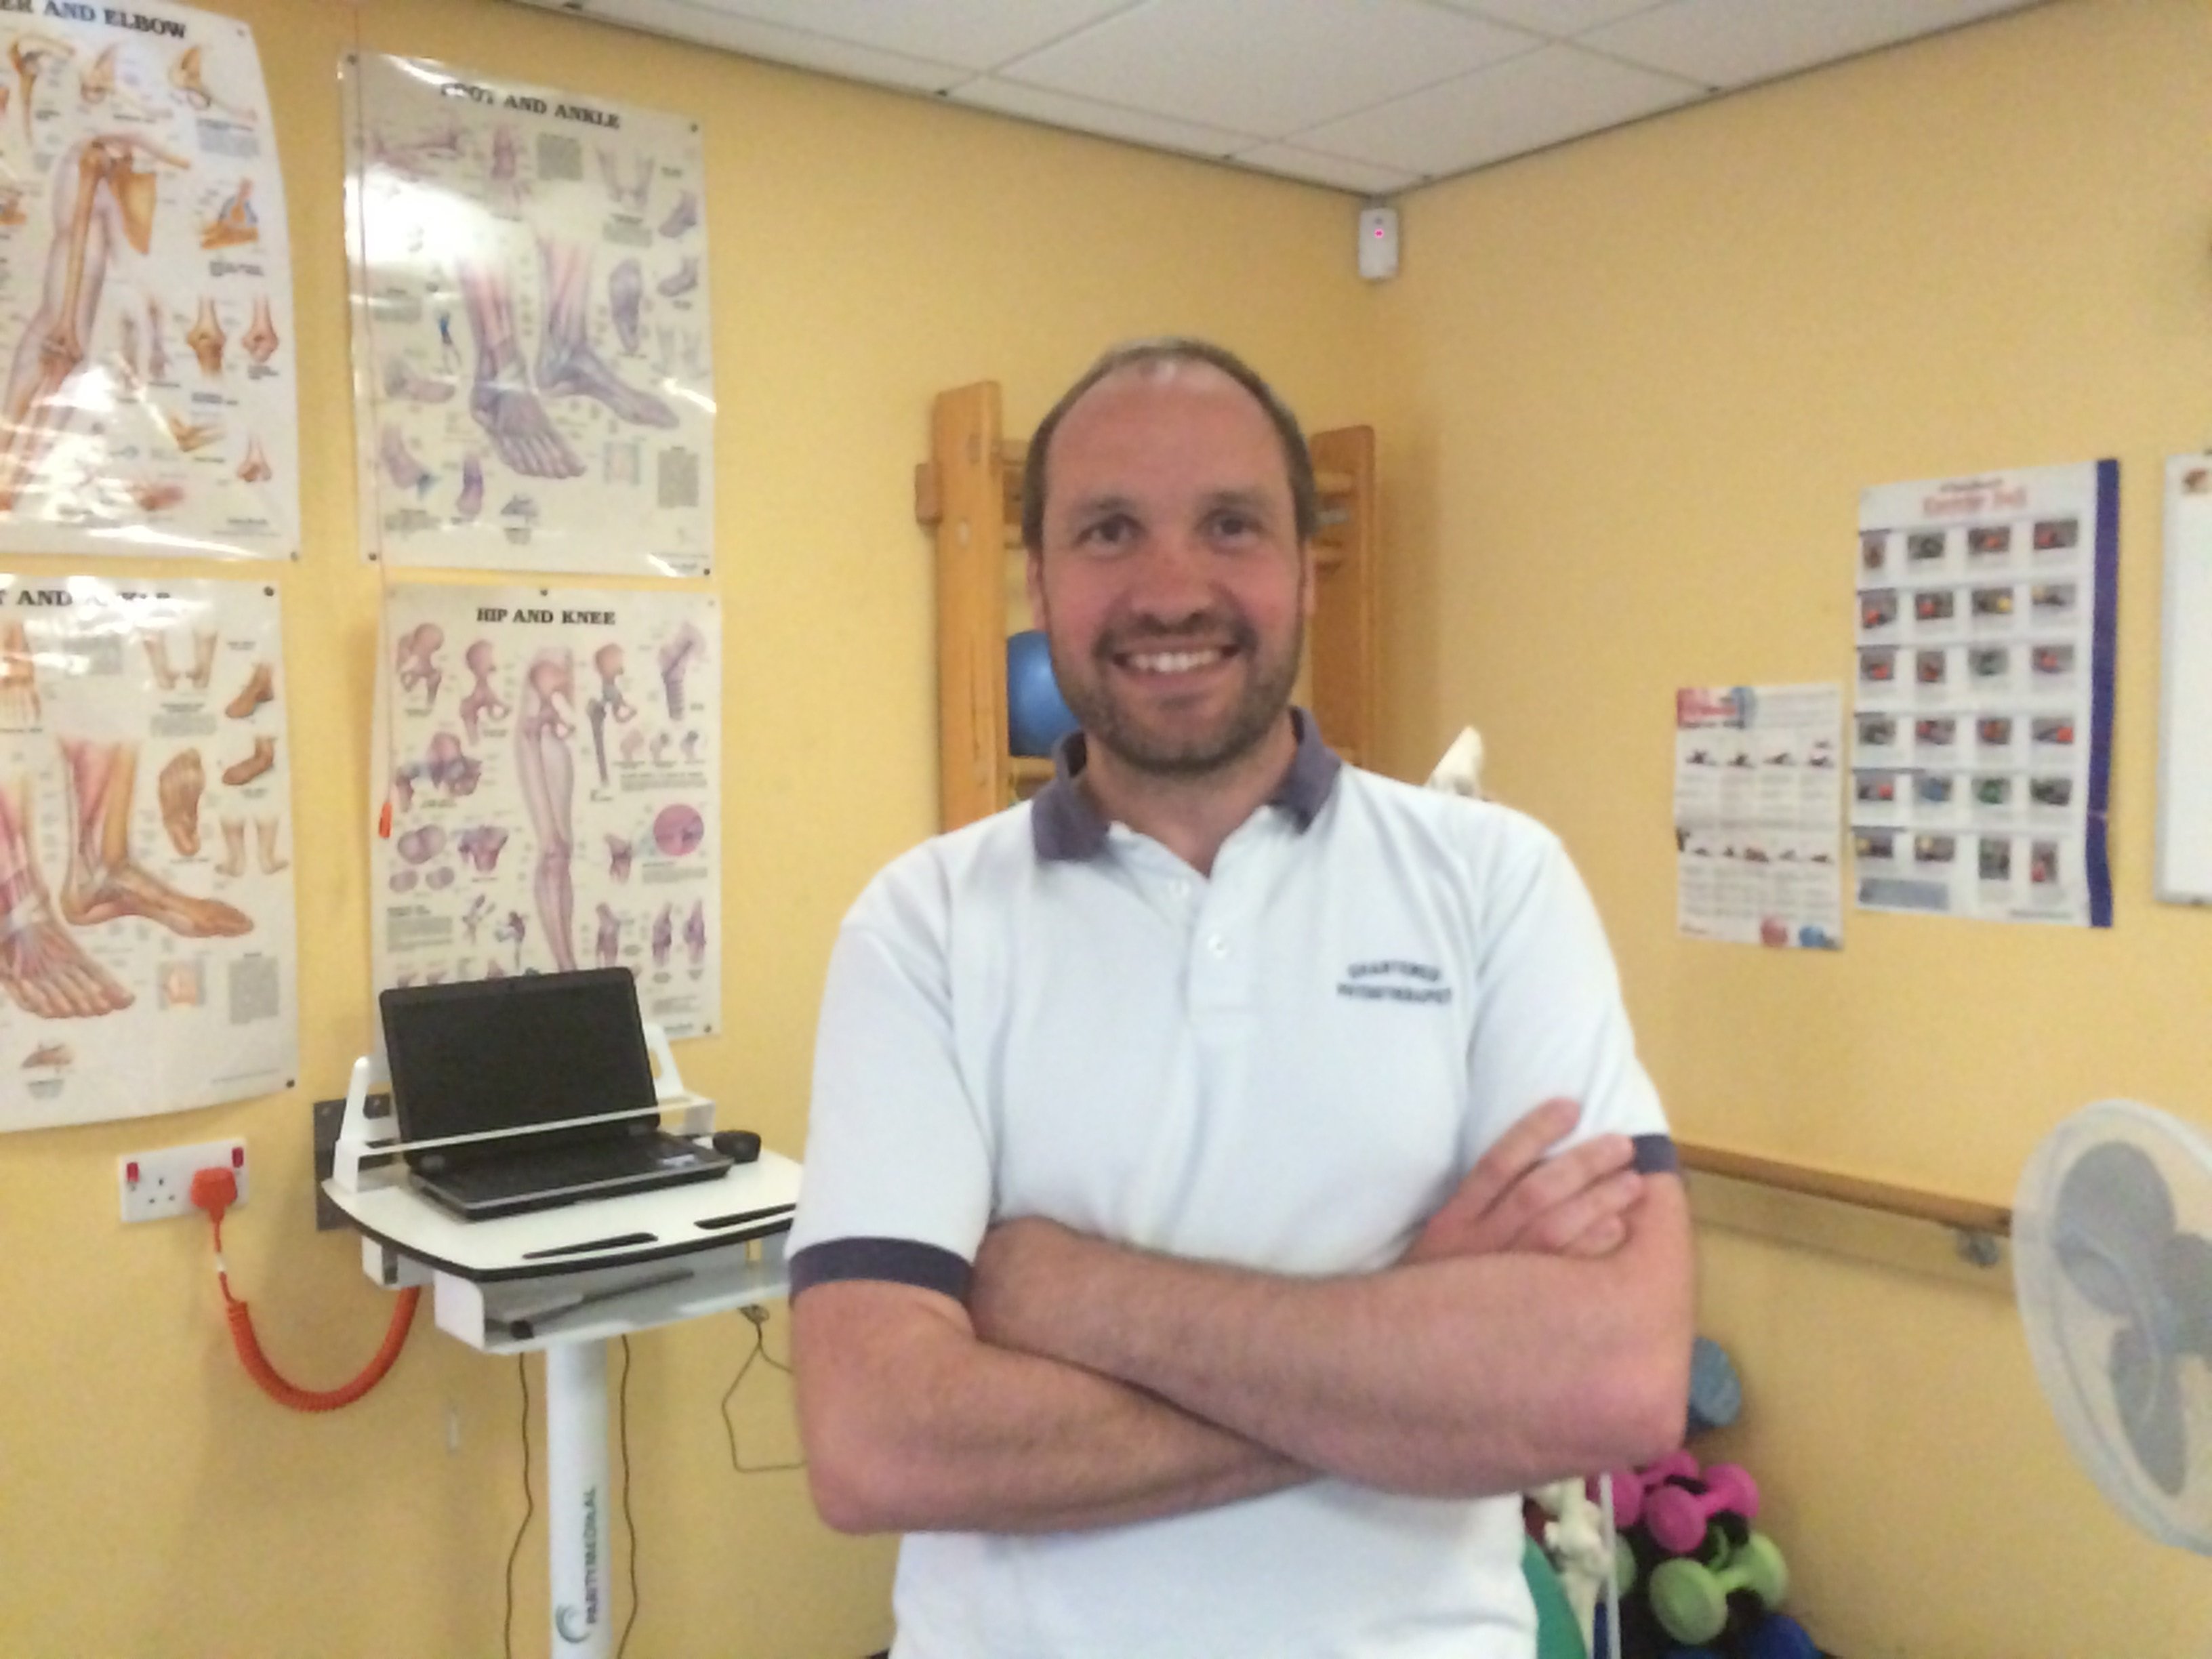 Specialist clinics for those with musculo-skeletal conditions in South Cumbria becomes permanent featured image